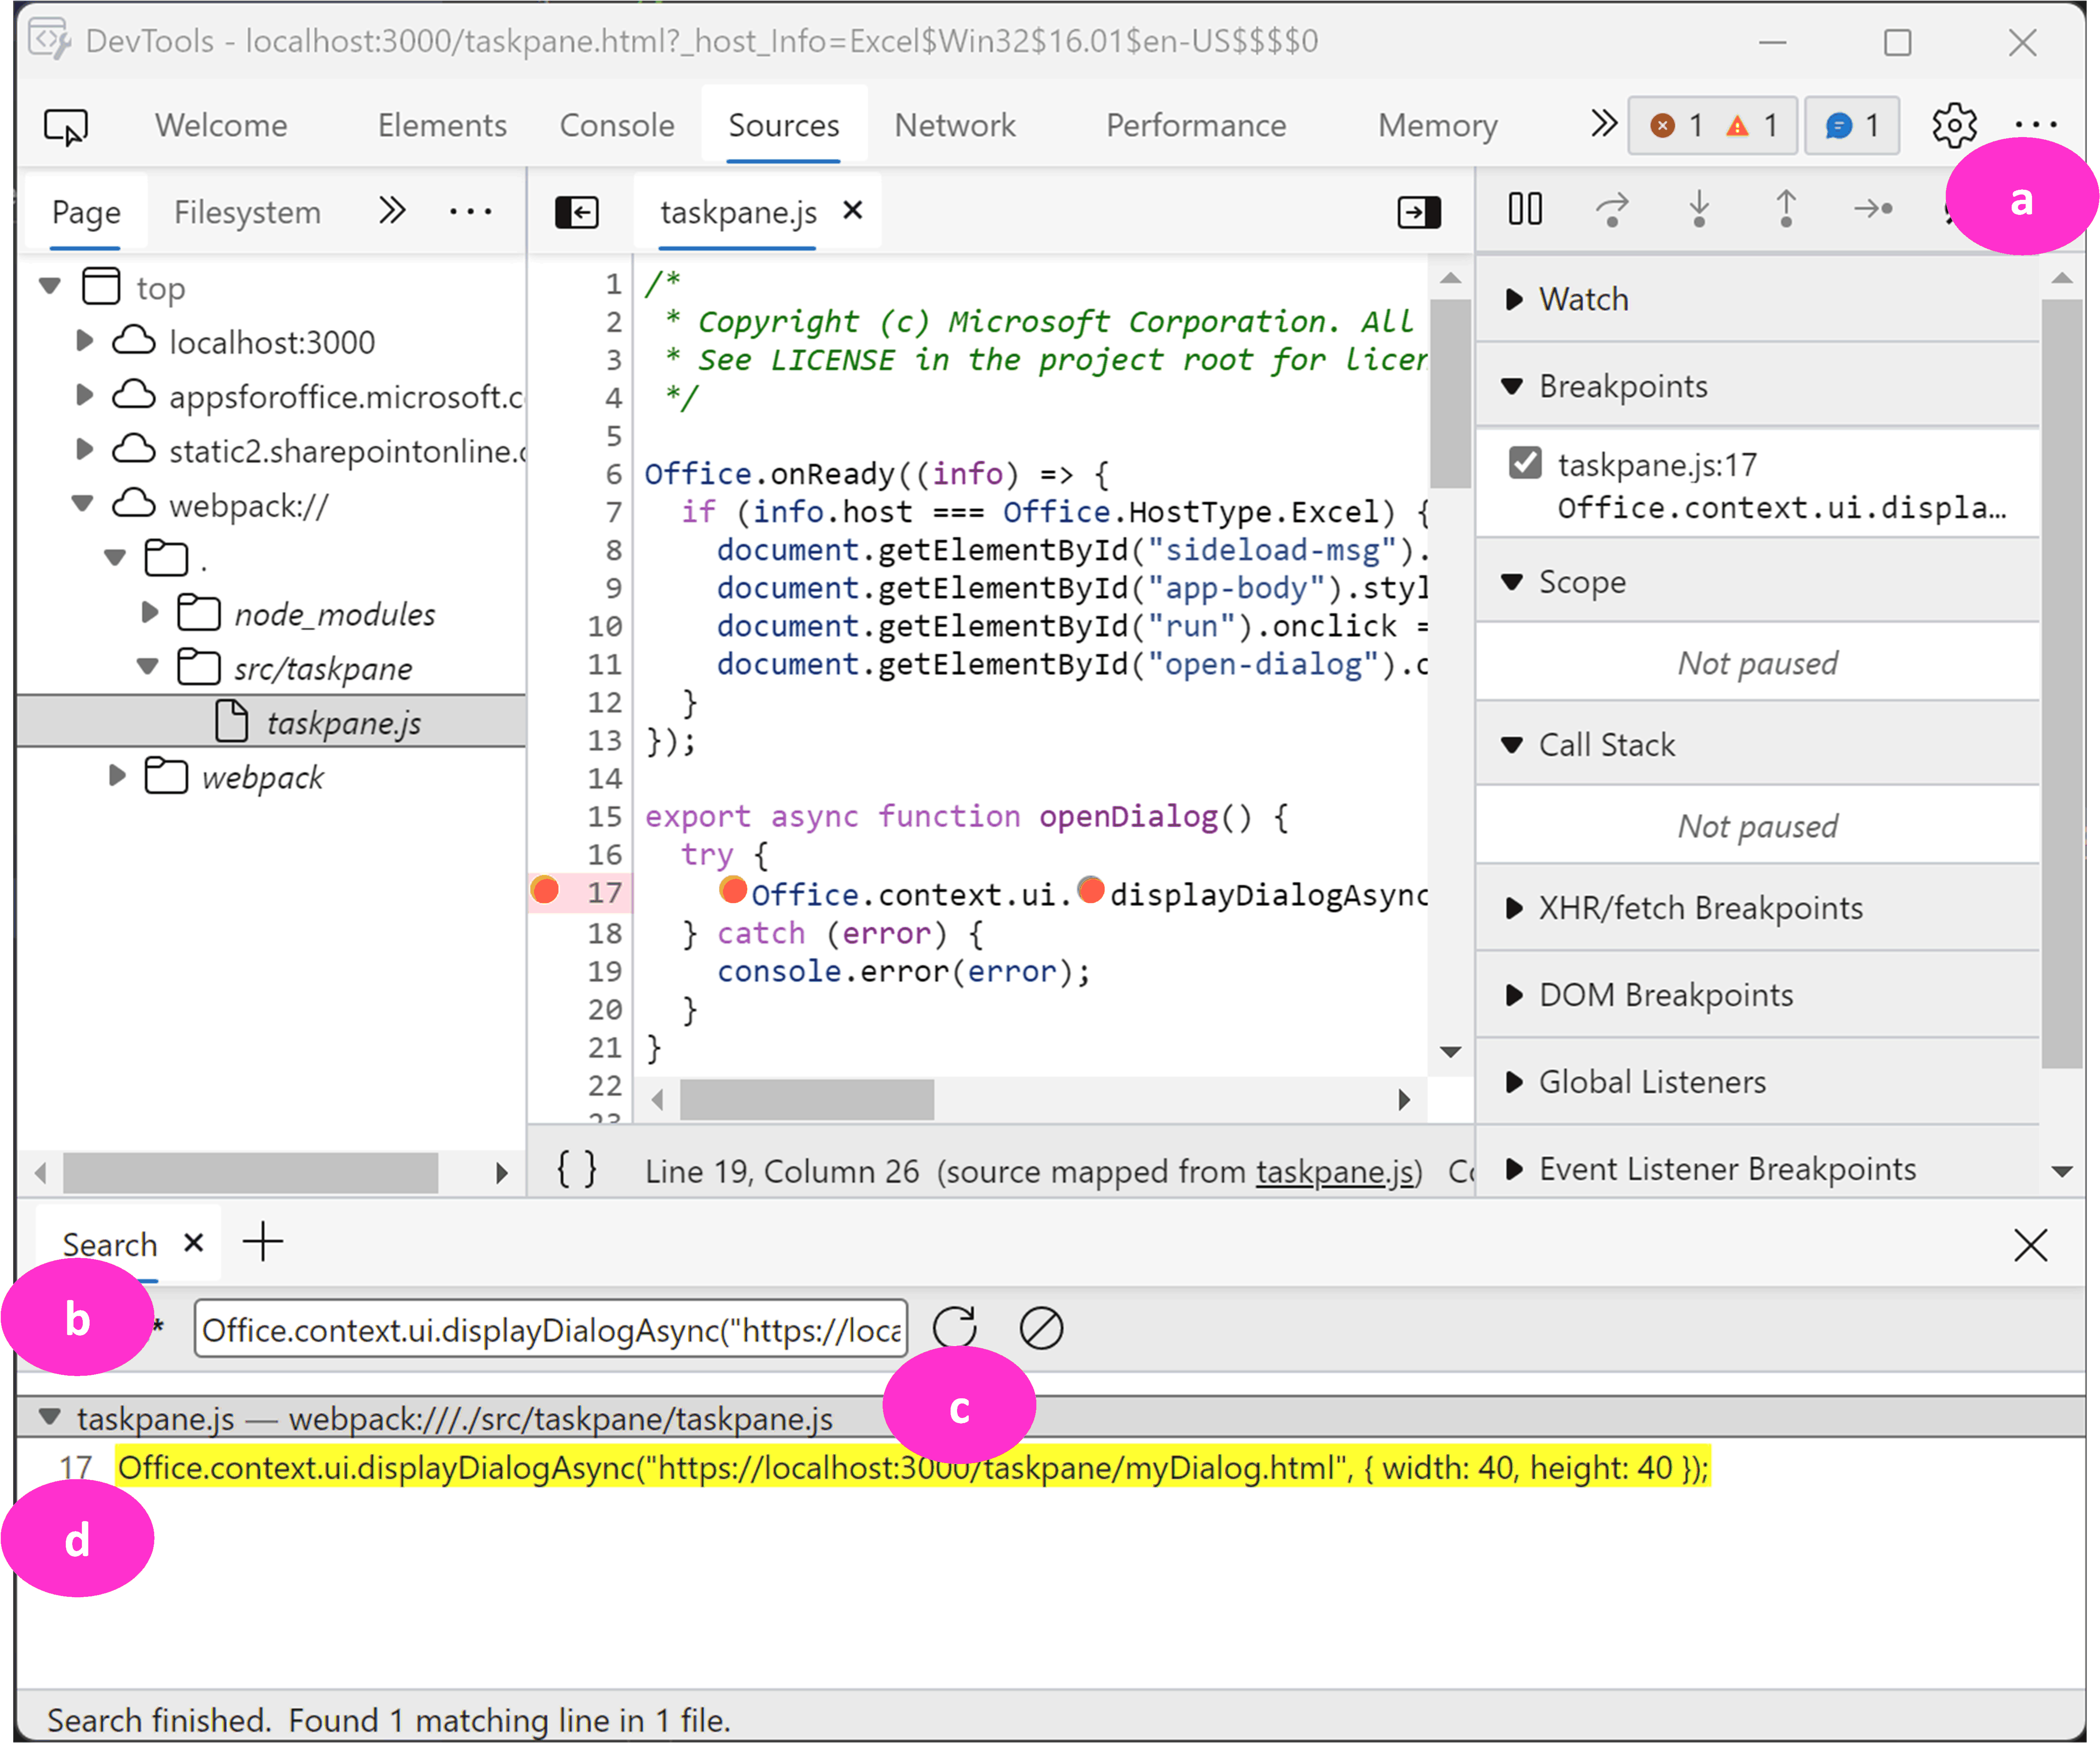 Edge Chromium developer tools source tab with 4 parts labelled A through D.